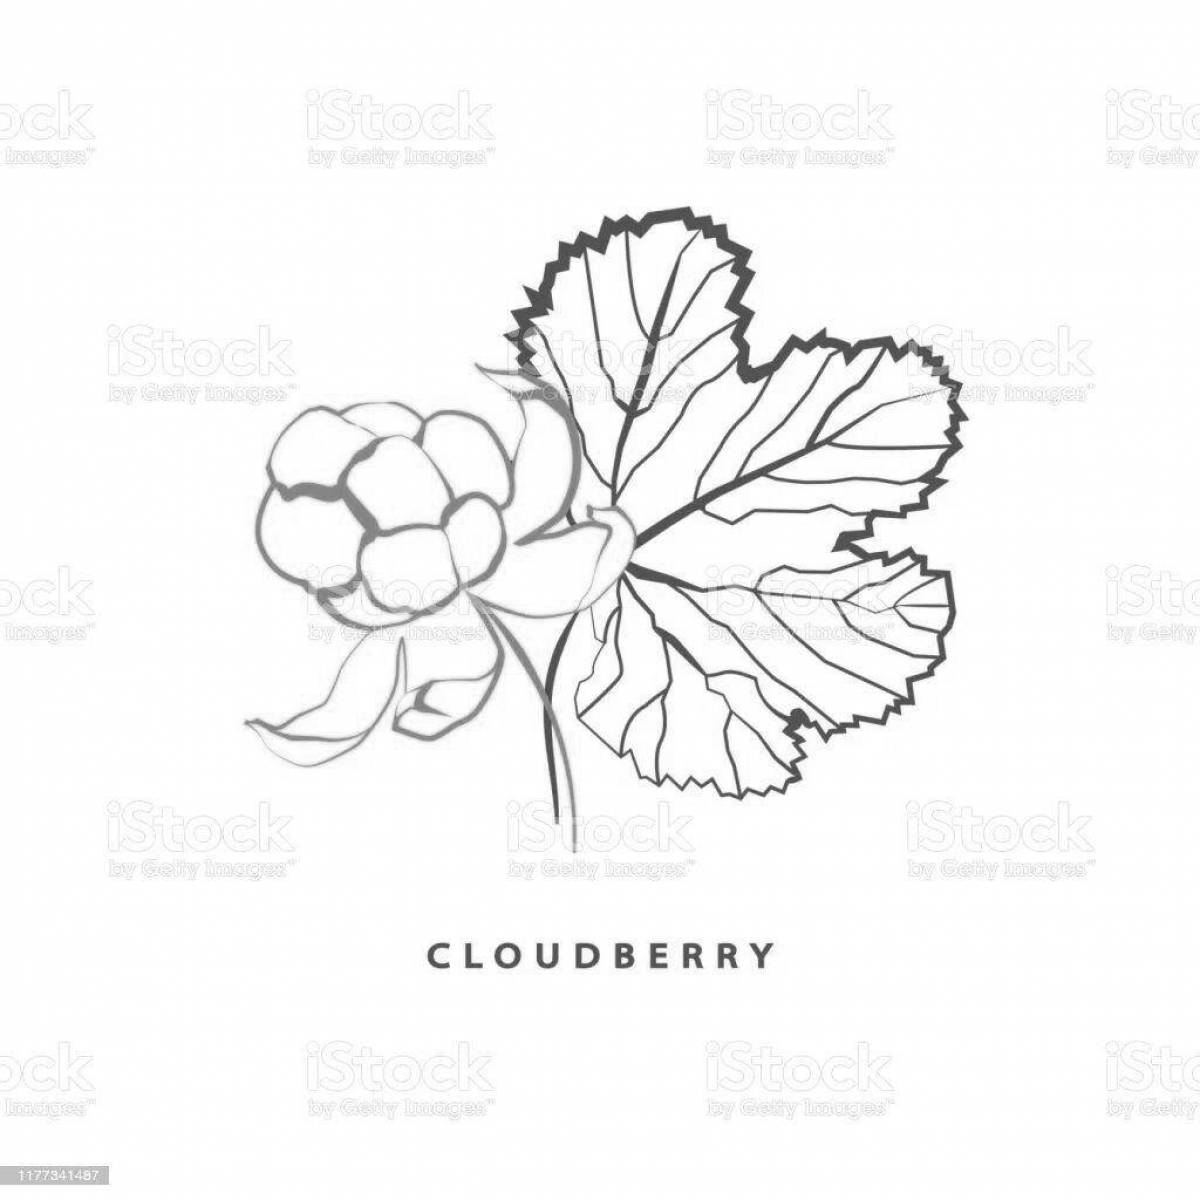 Fabulous cloudberry coloring book for kids